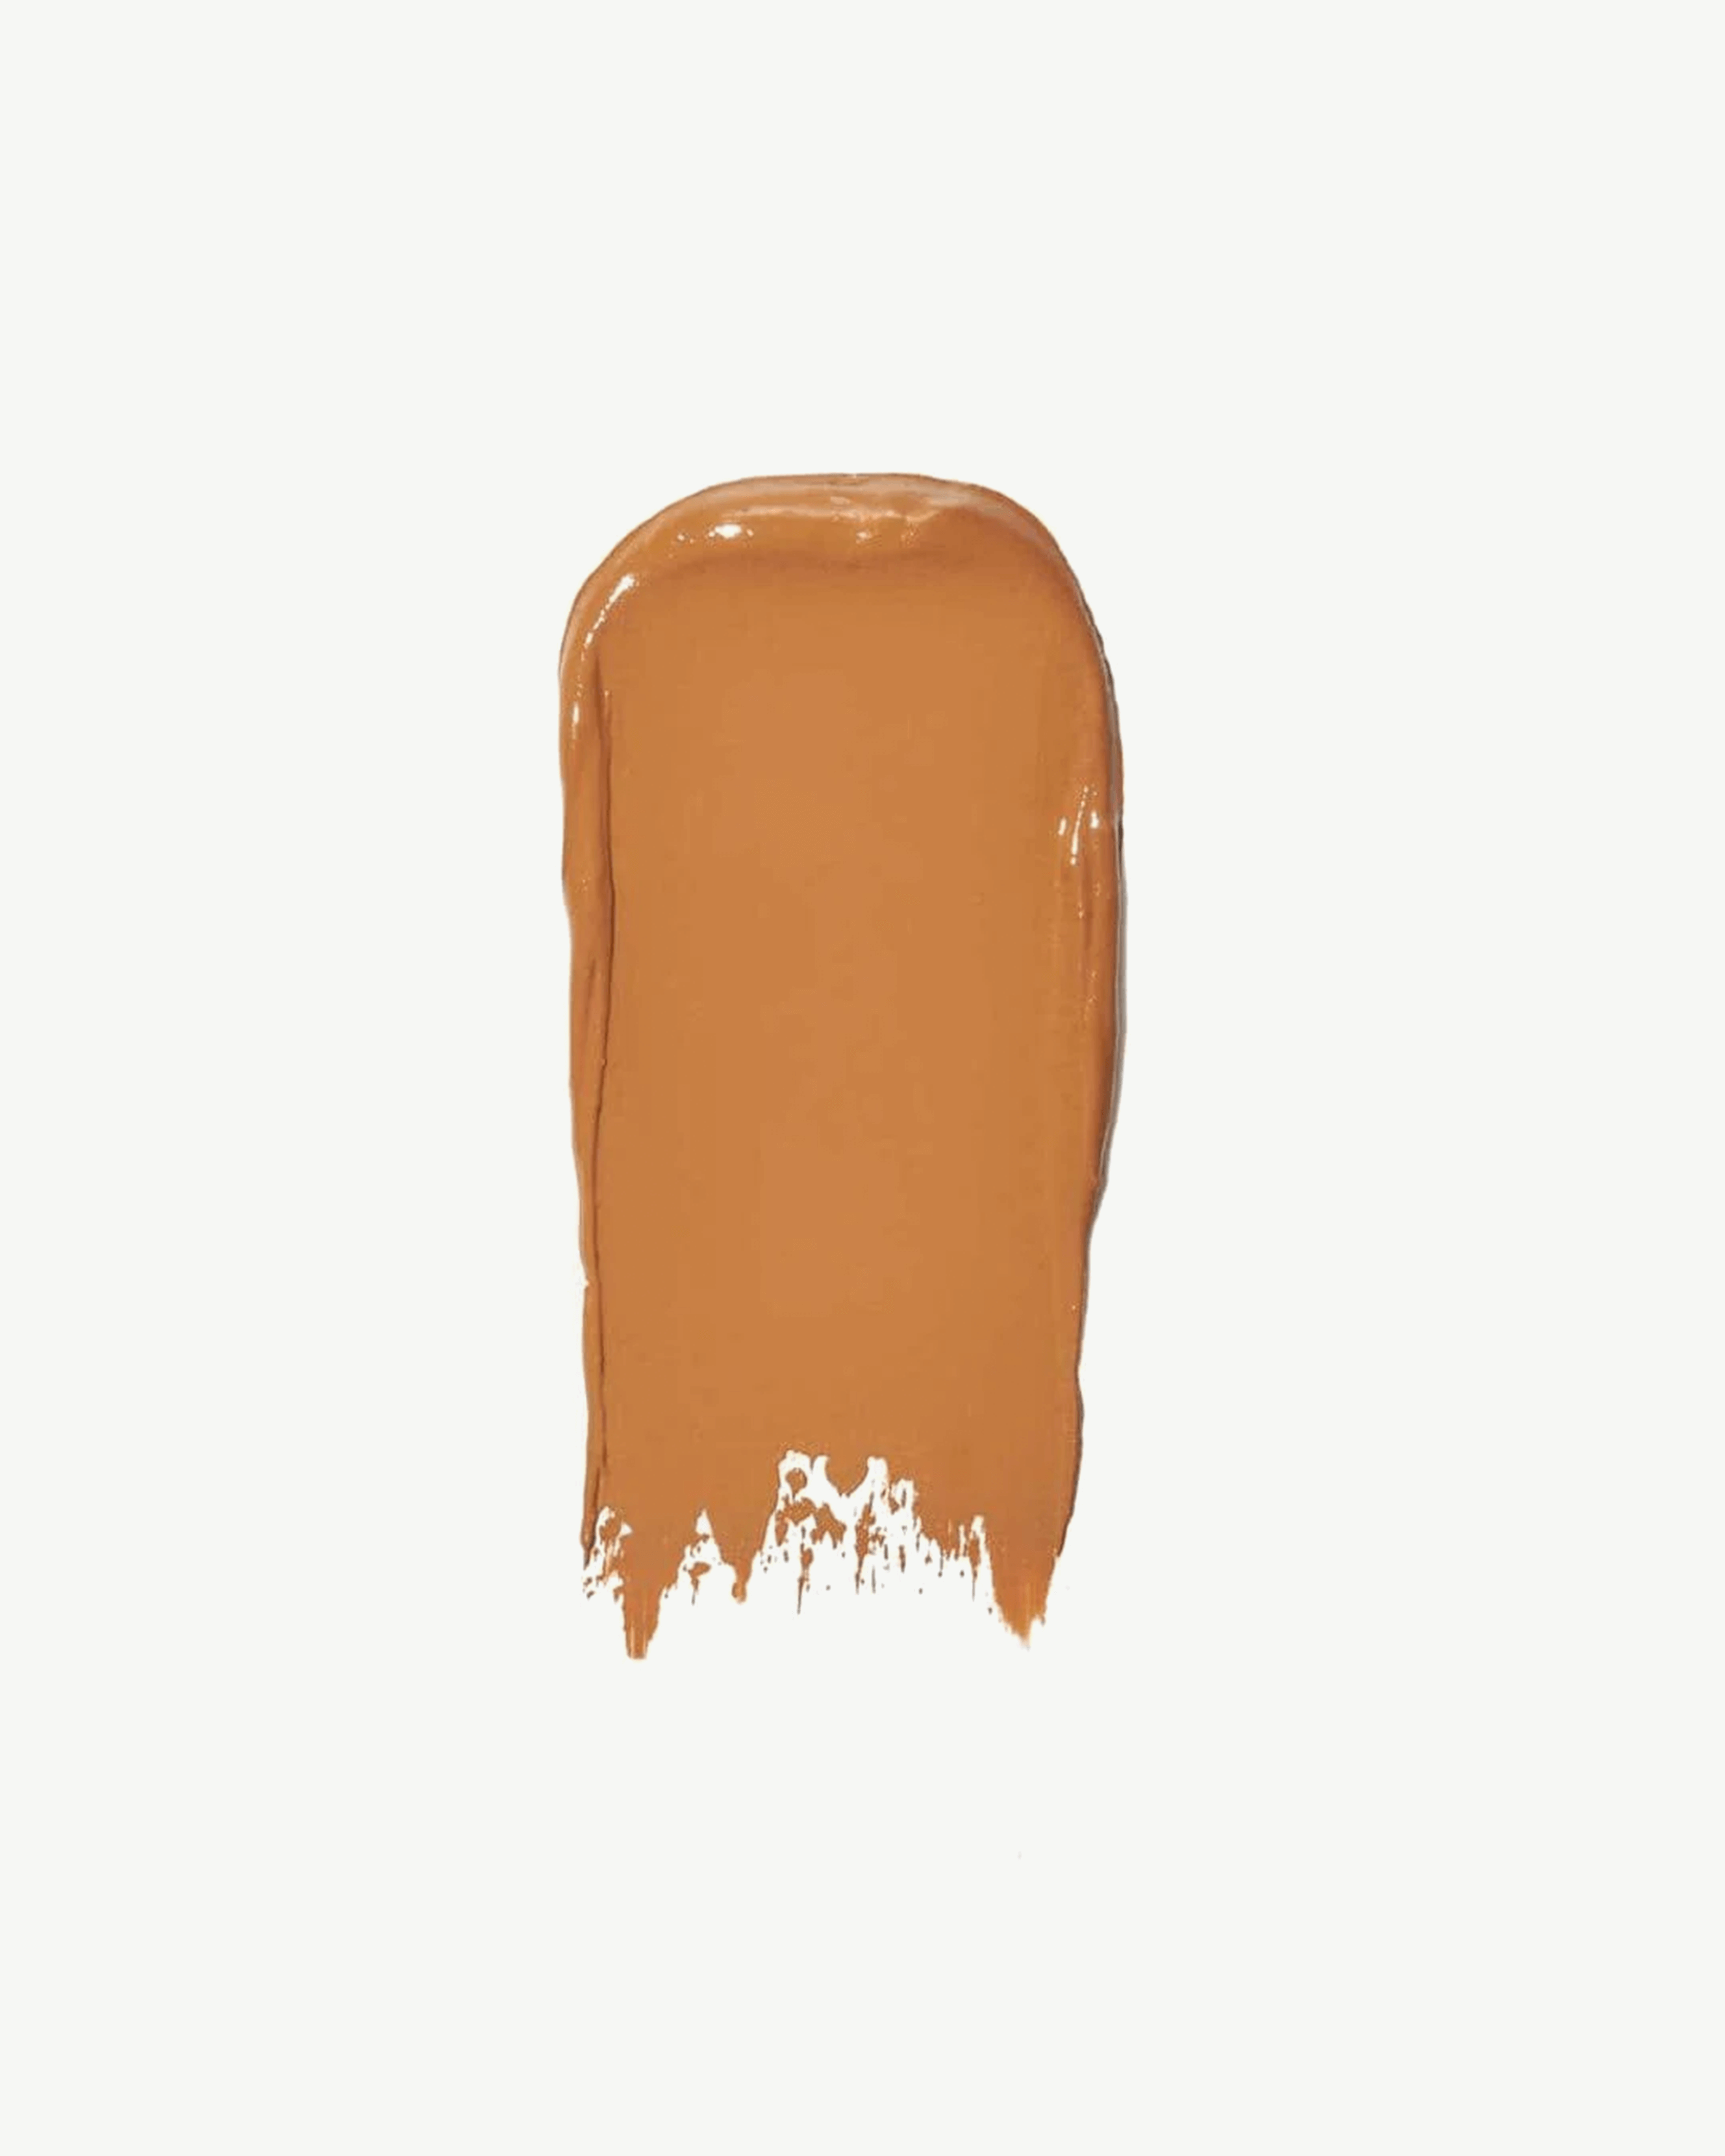 Shade 66 (for deep skin with amber undertones)